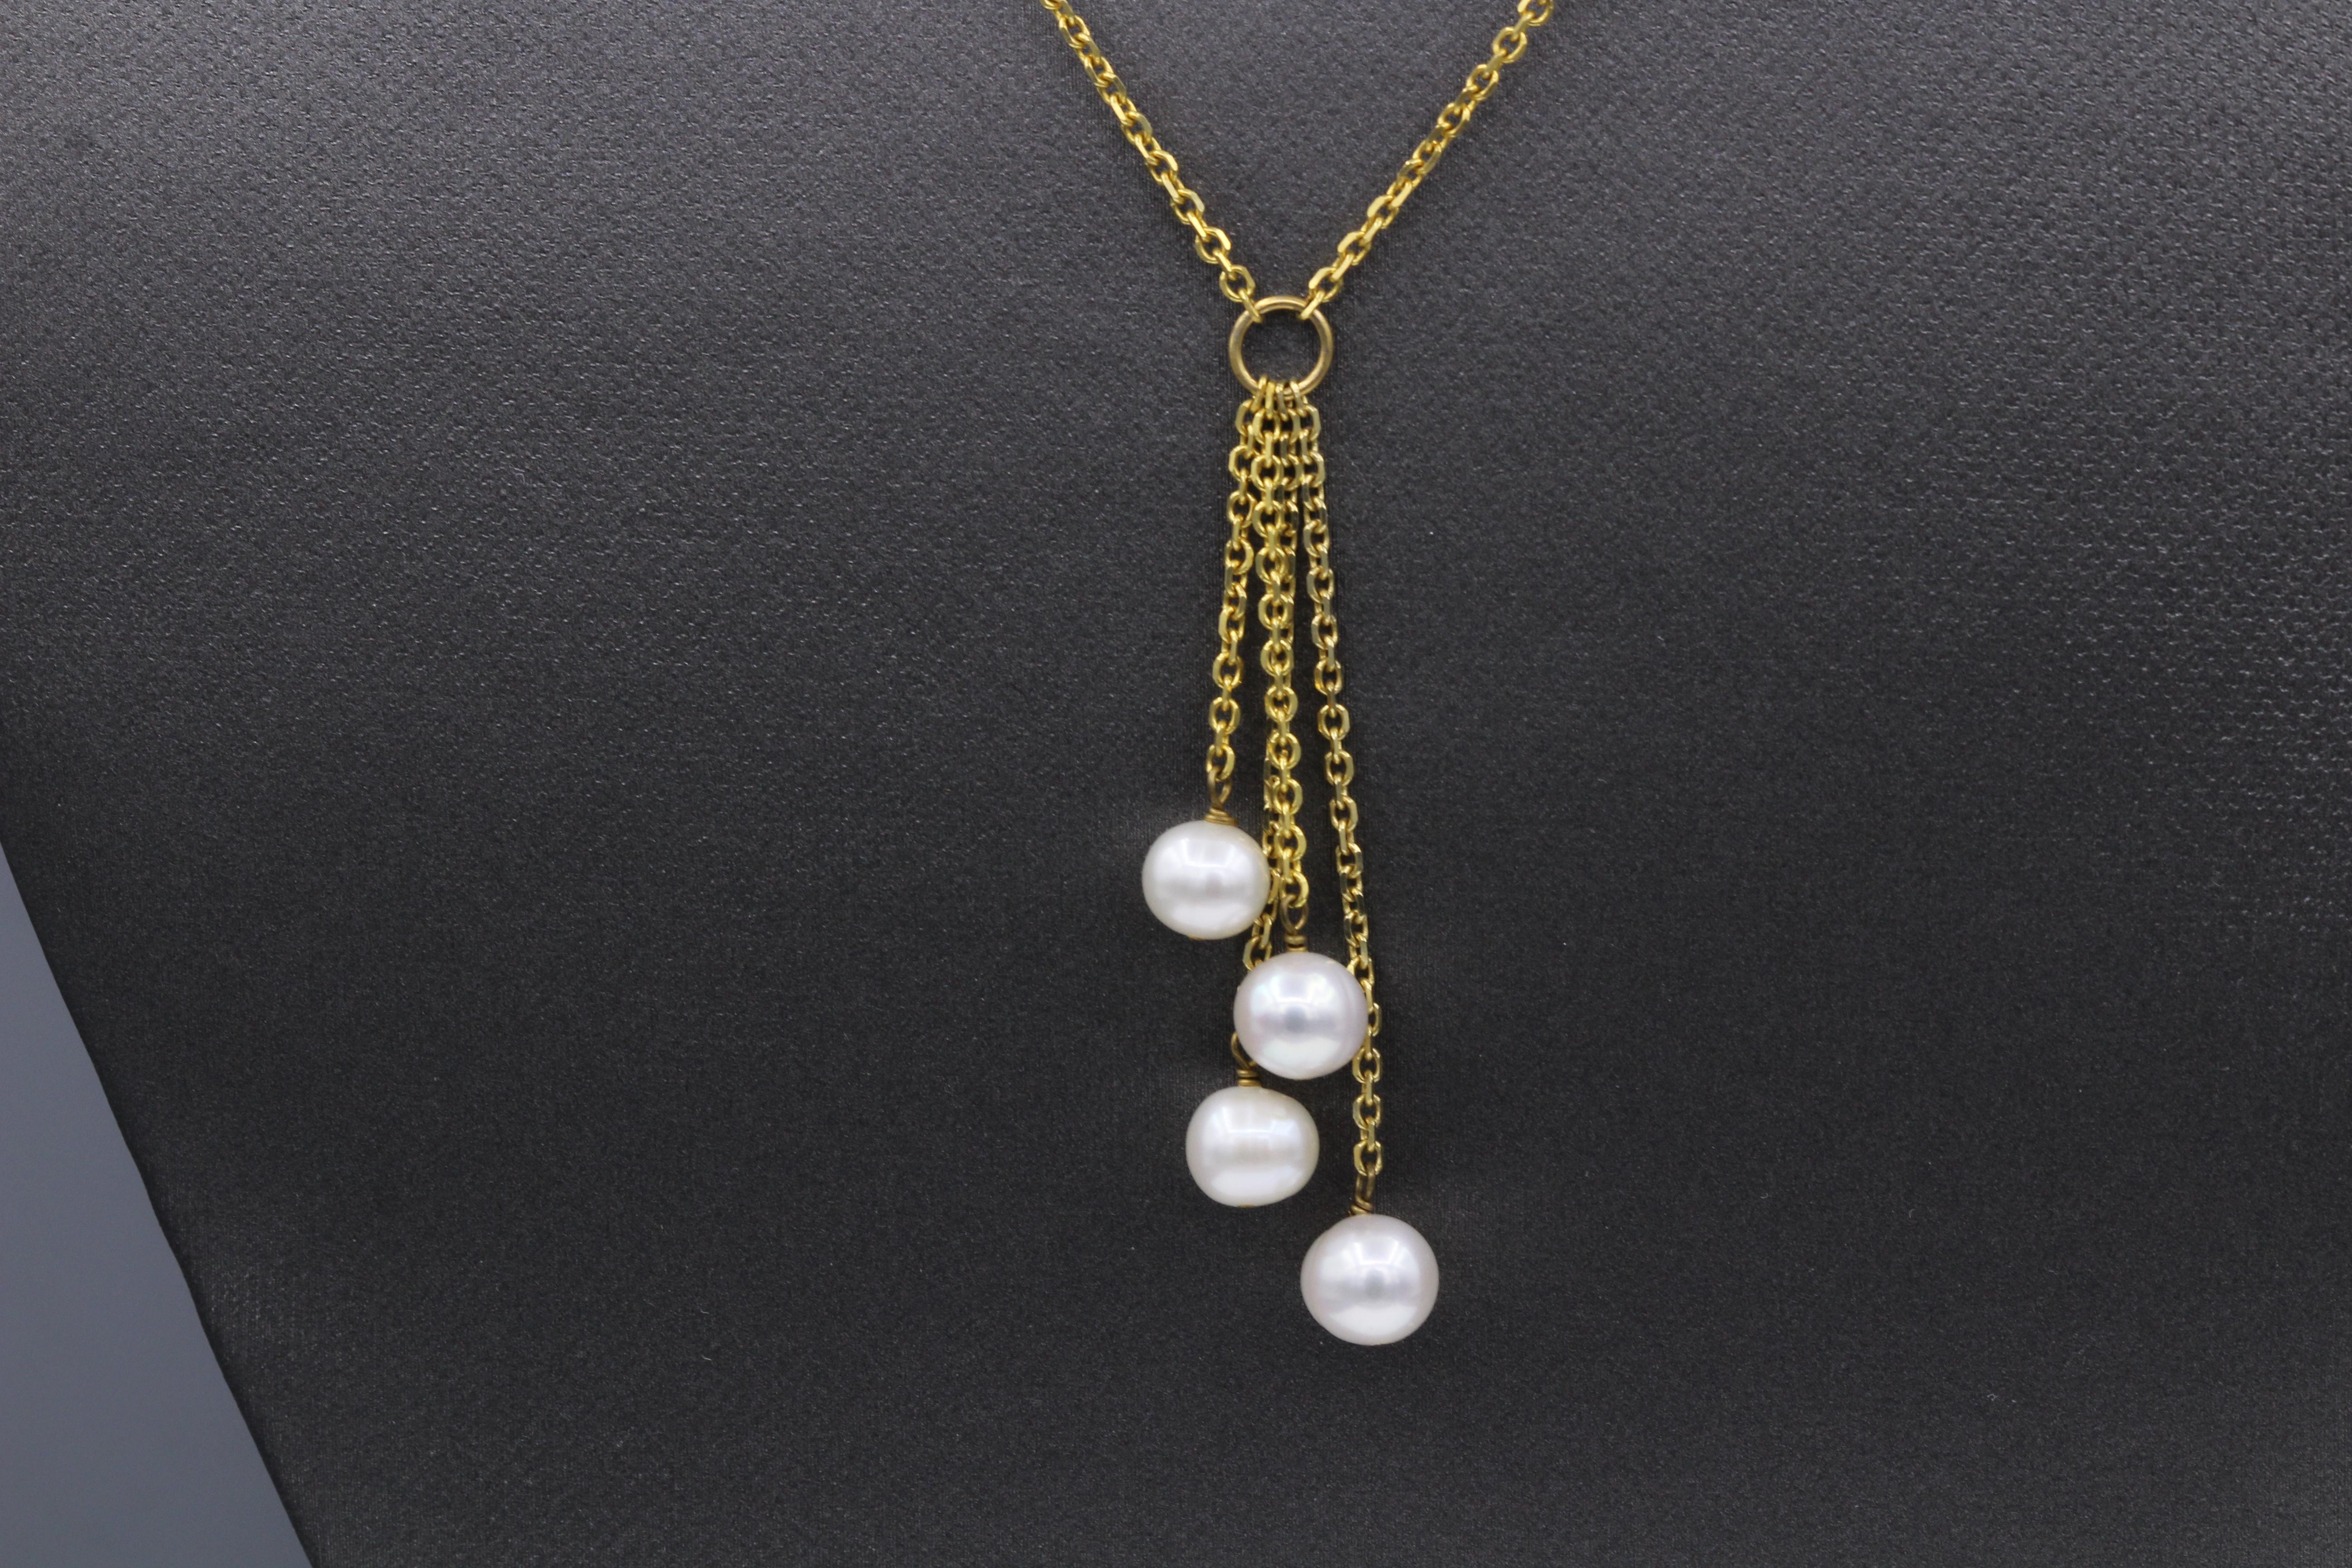 Elegant Dangling Pearls Necklace
Chain: Cable Style 14k Yellow Gold
Length 16’ Inch
Dangle Length approx. 2’ Inch
Fresh water pearls approx. 5.0 mm
Spring Ring Lock
Total Weight 7.50 grams

